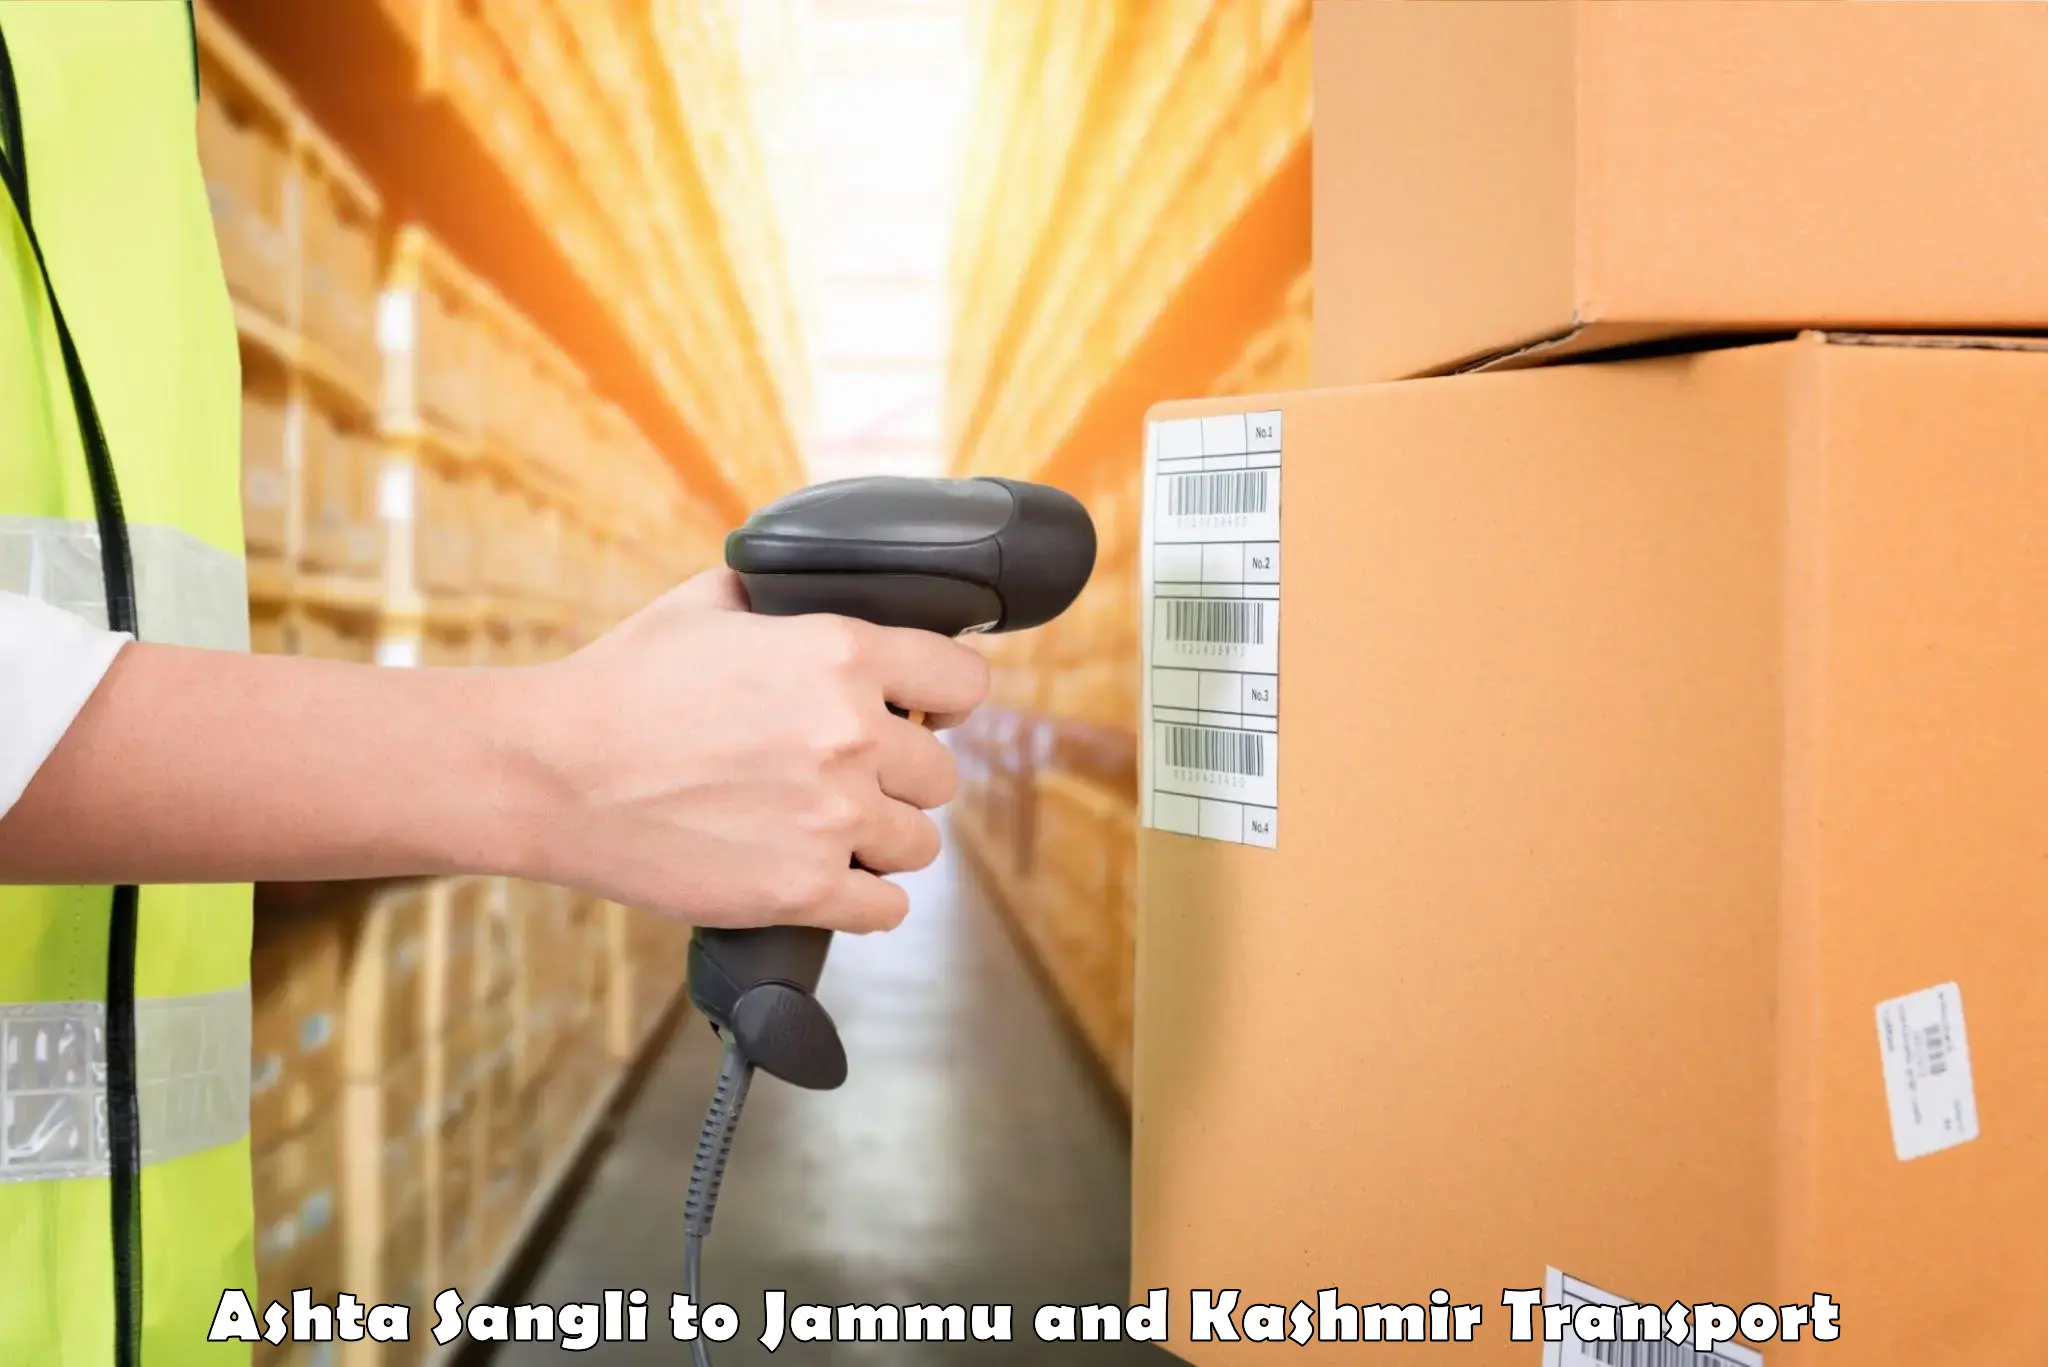 Package delivery services Ashta Sangli to Jammu and Kashmir